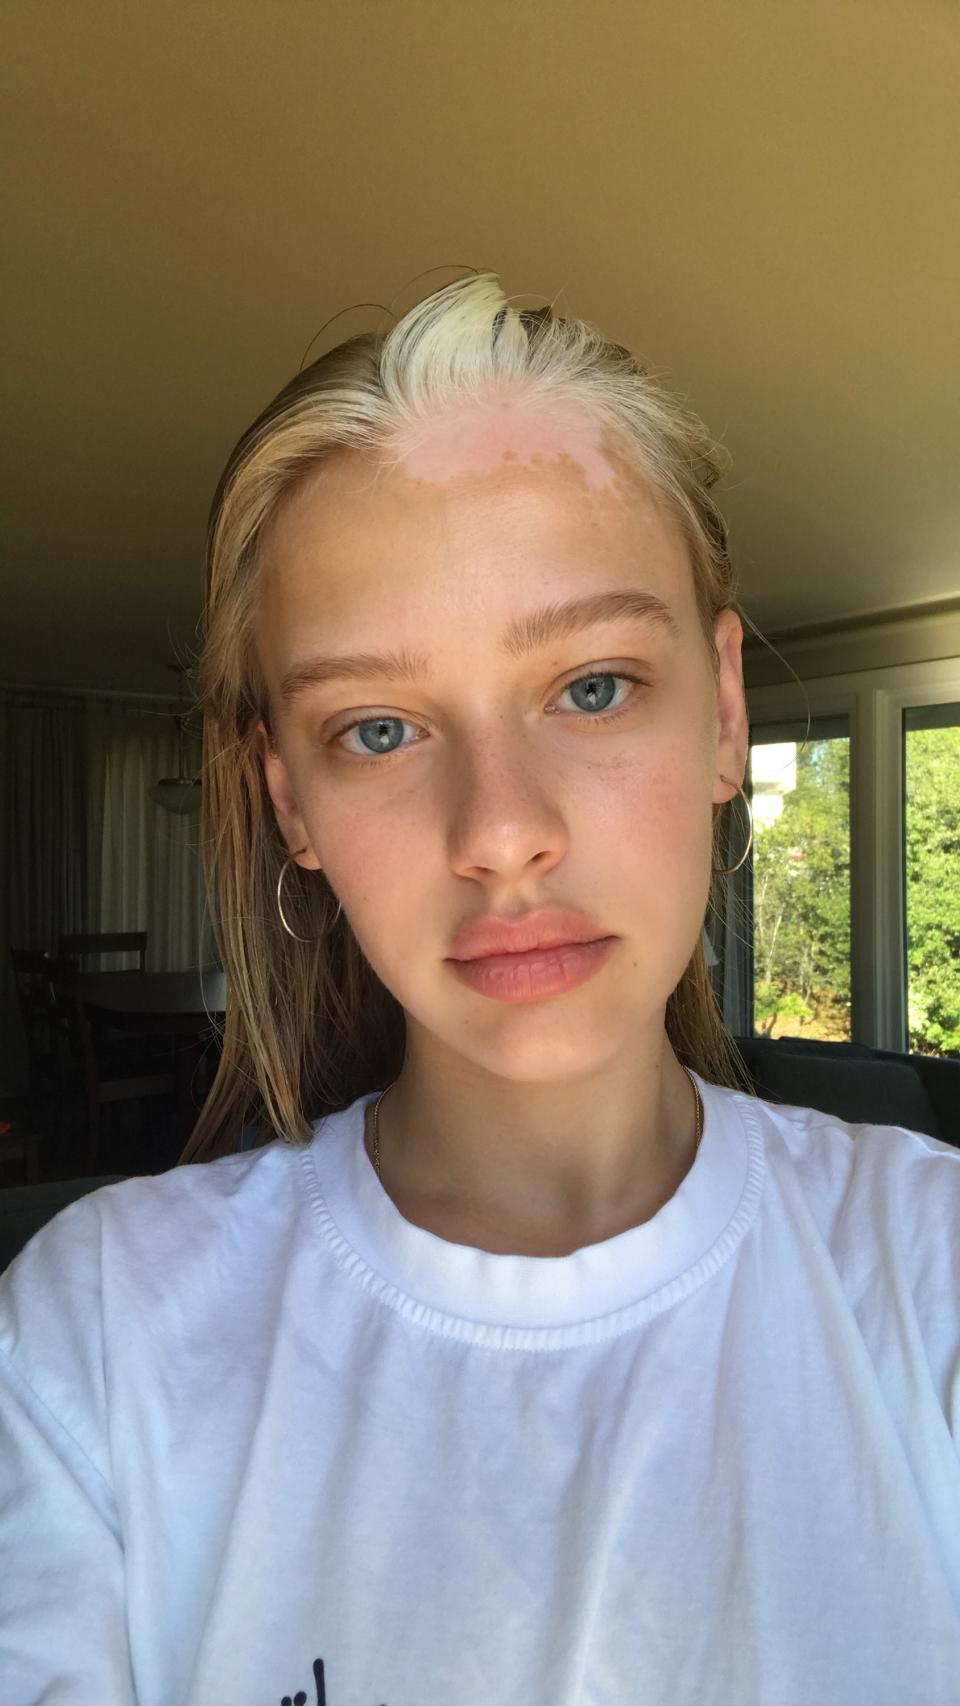 Porcelain skin, clear blue eyes, and a striking white streak on her forehead and in her hair: Meet Tia Jonsson, the 21-year-old model who embraces her vitiligo.